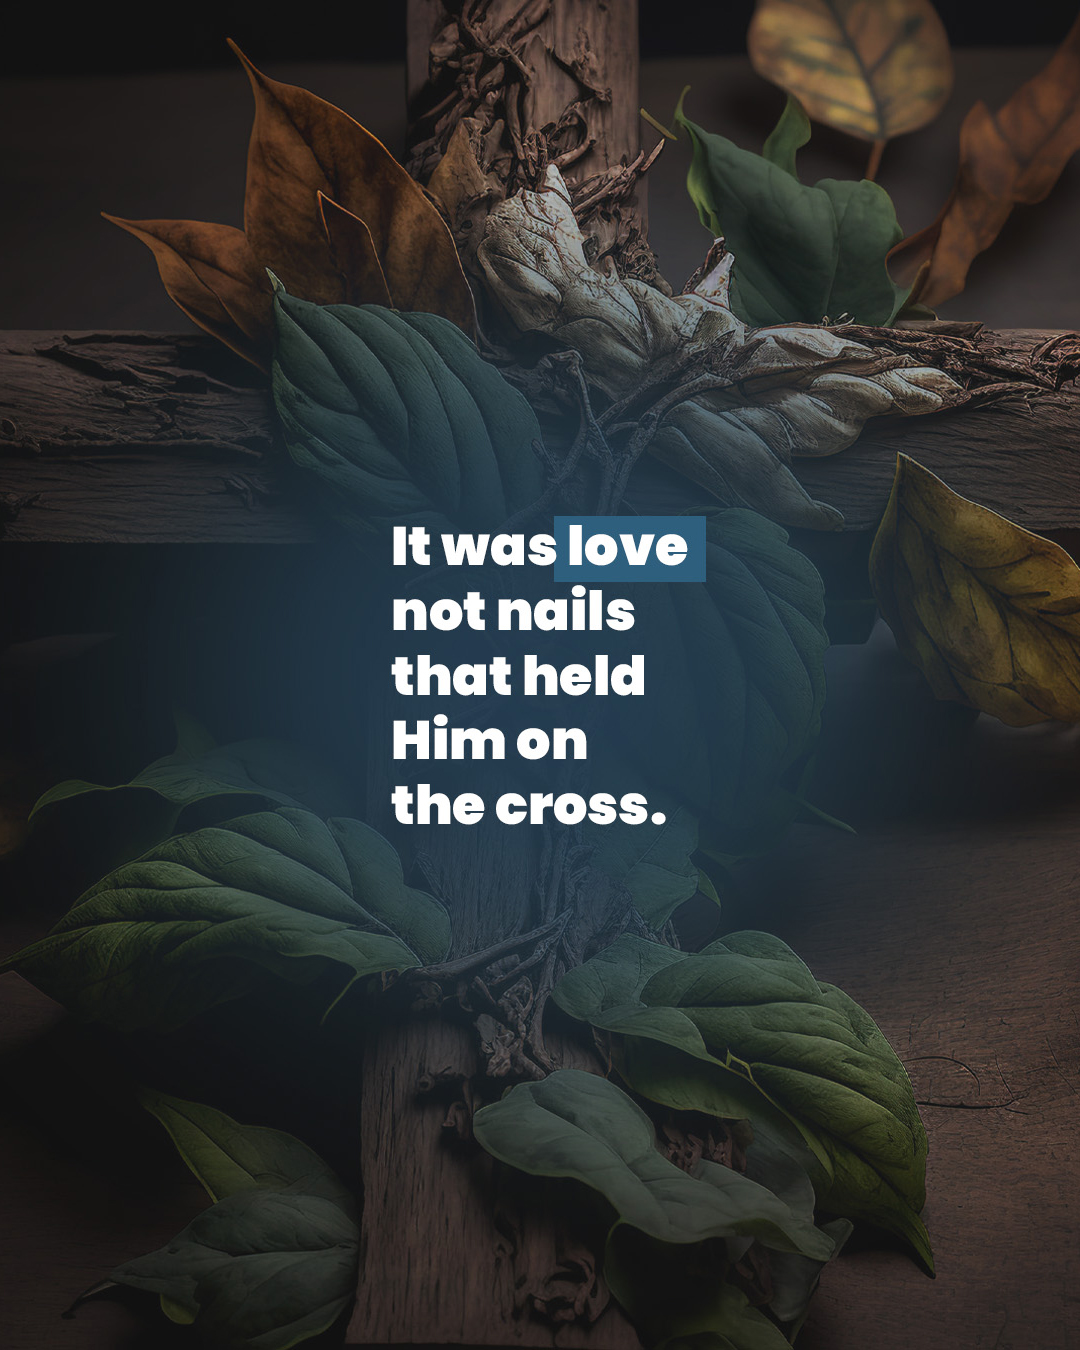 It was love not nails that held Him on the cross.